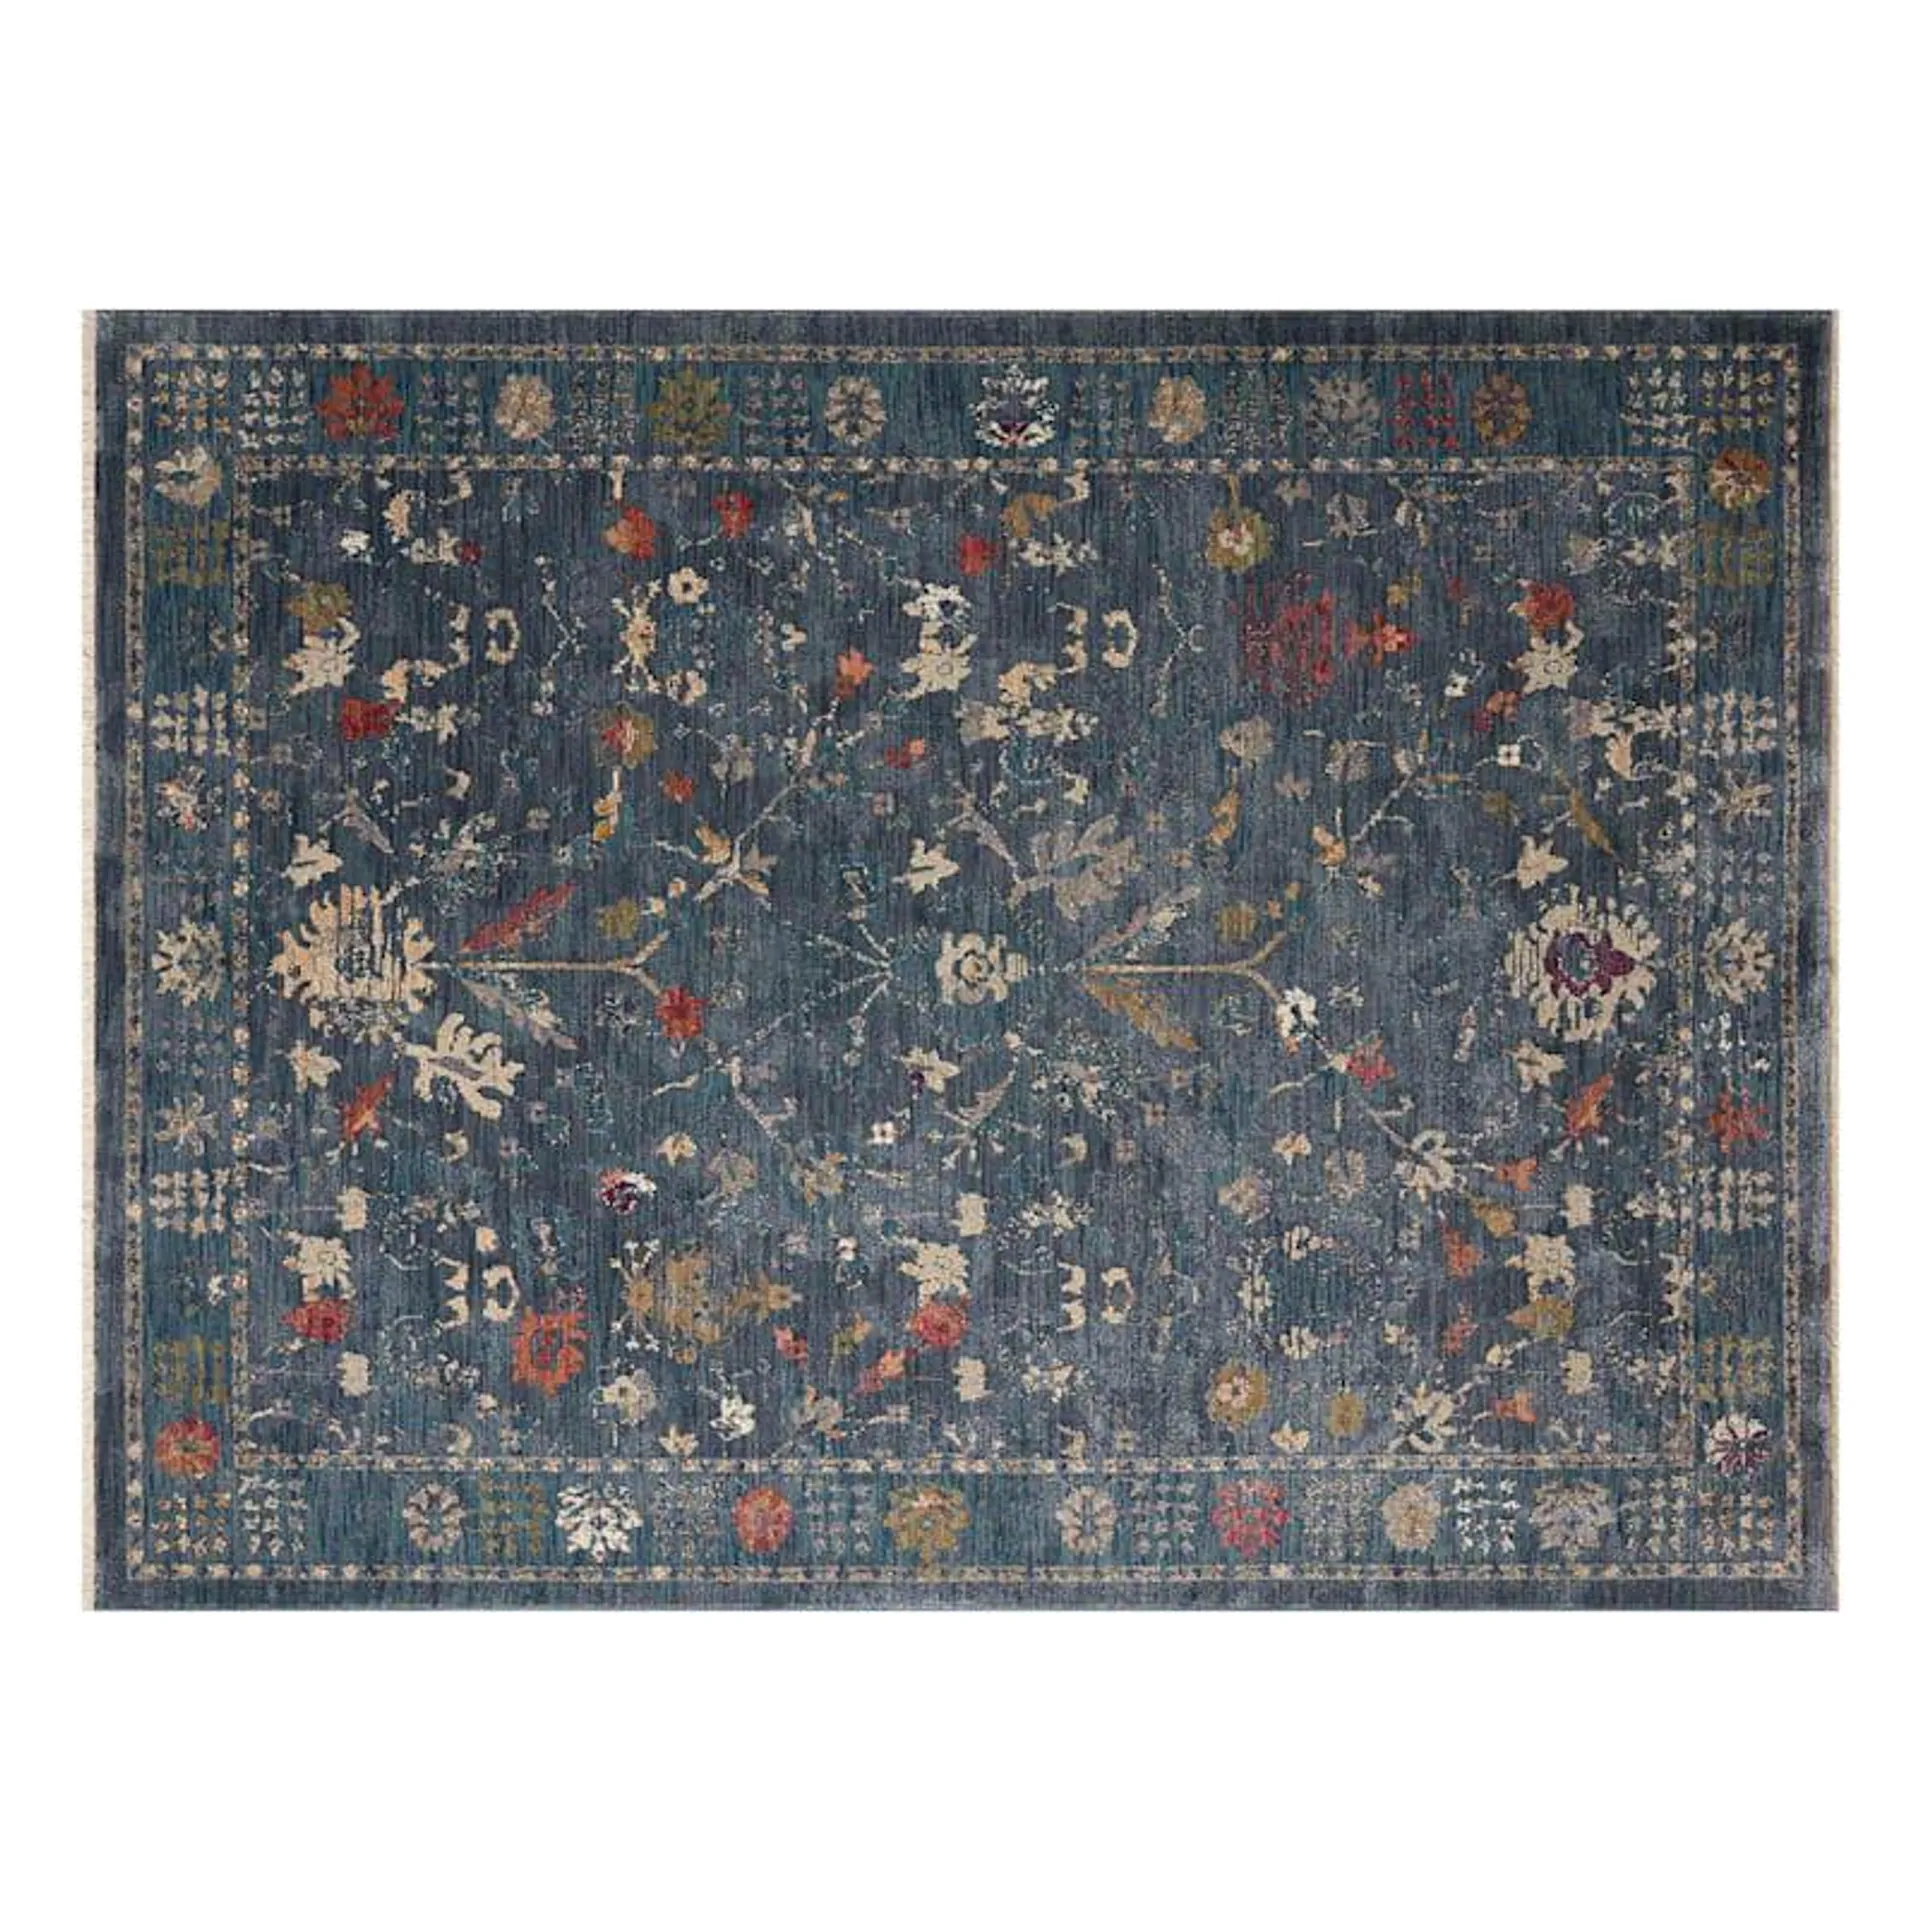 (A475) Grace Mitchell Blue Floral Area Rug, 5x8